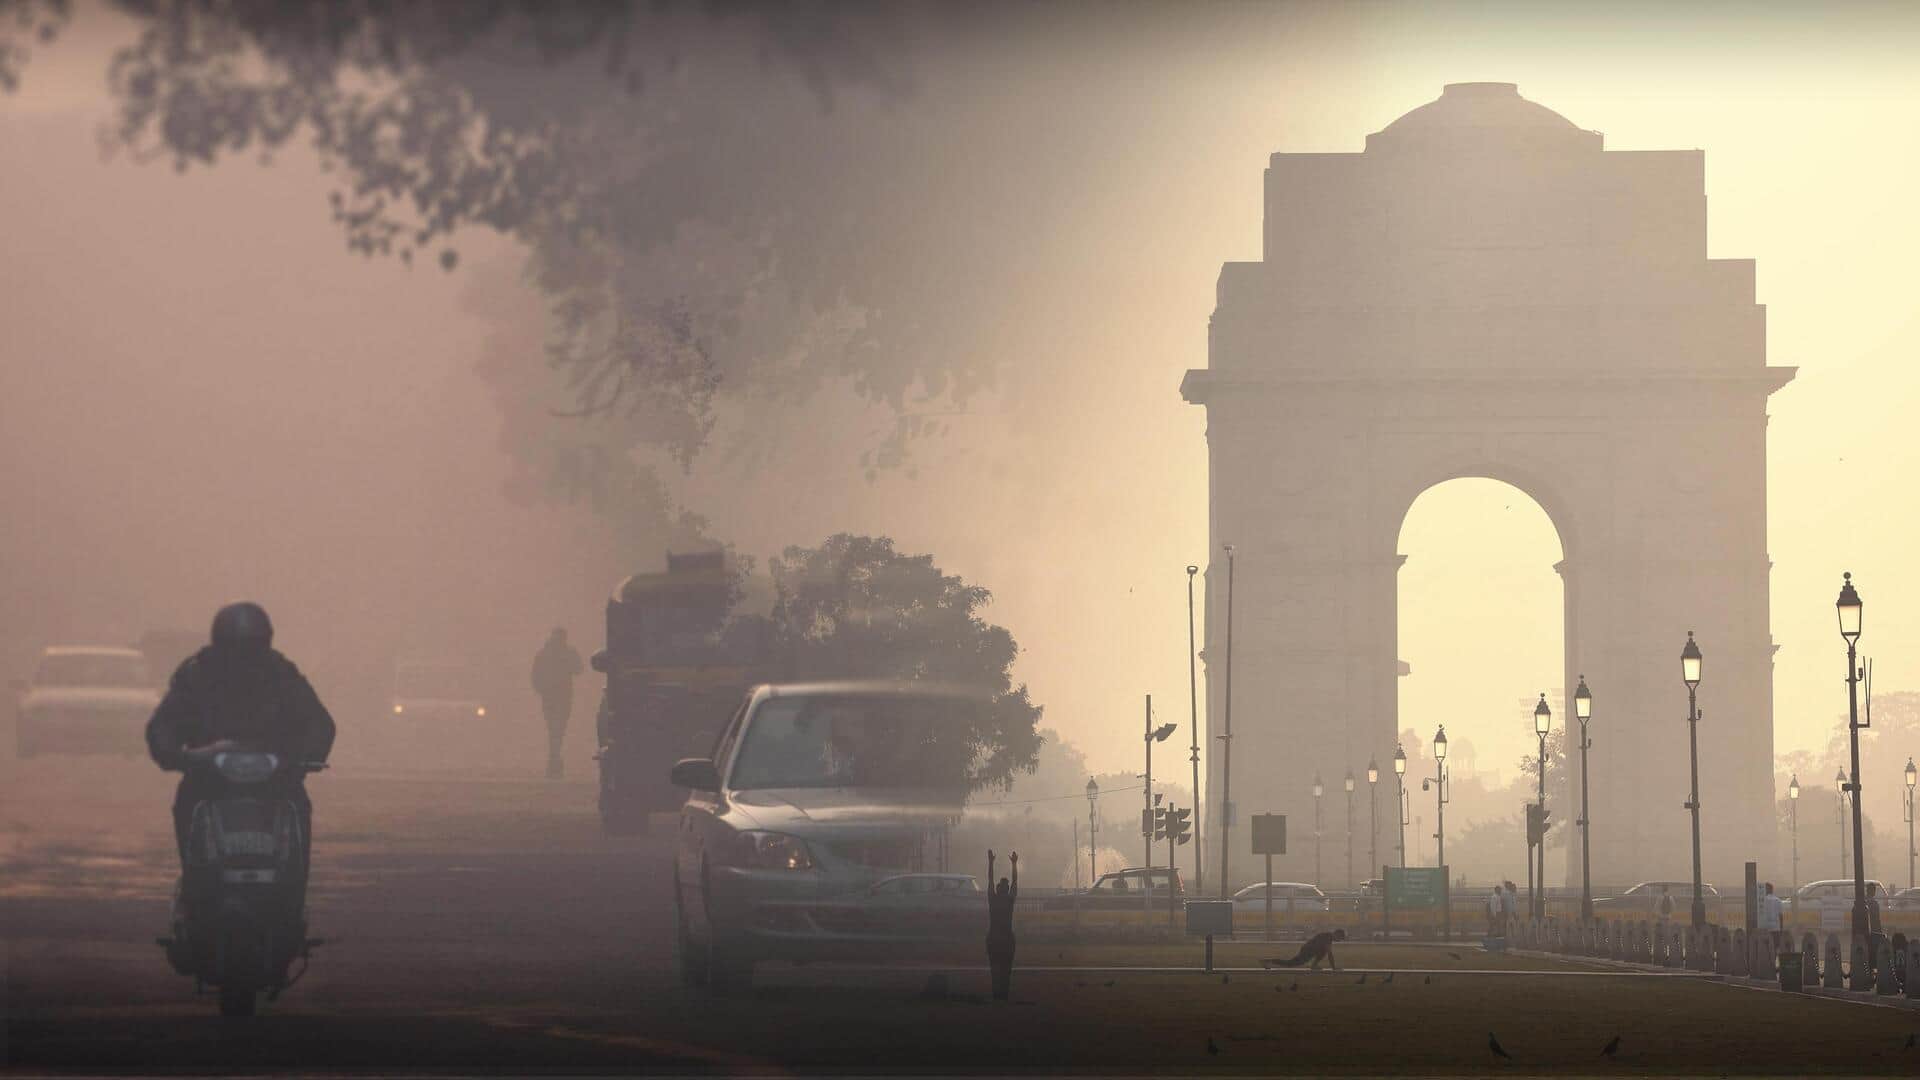 Air pollution in India continues to rise despite government efforts